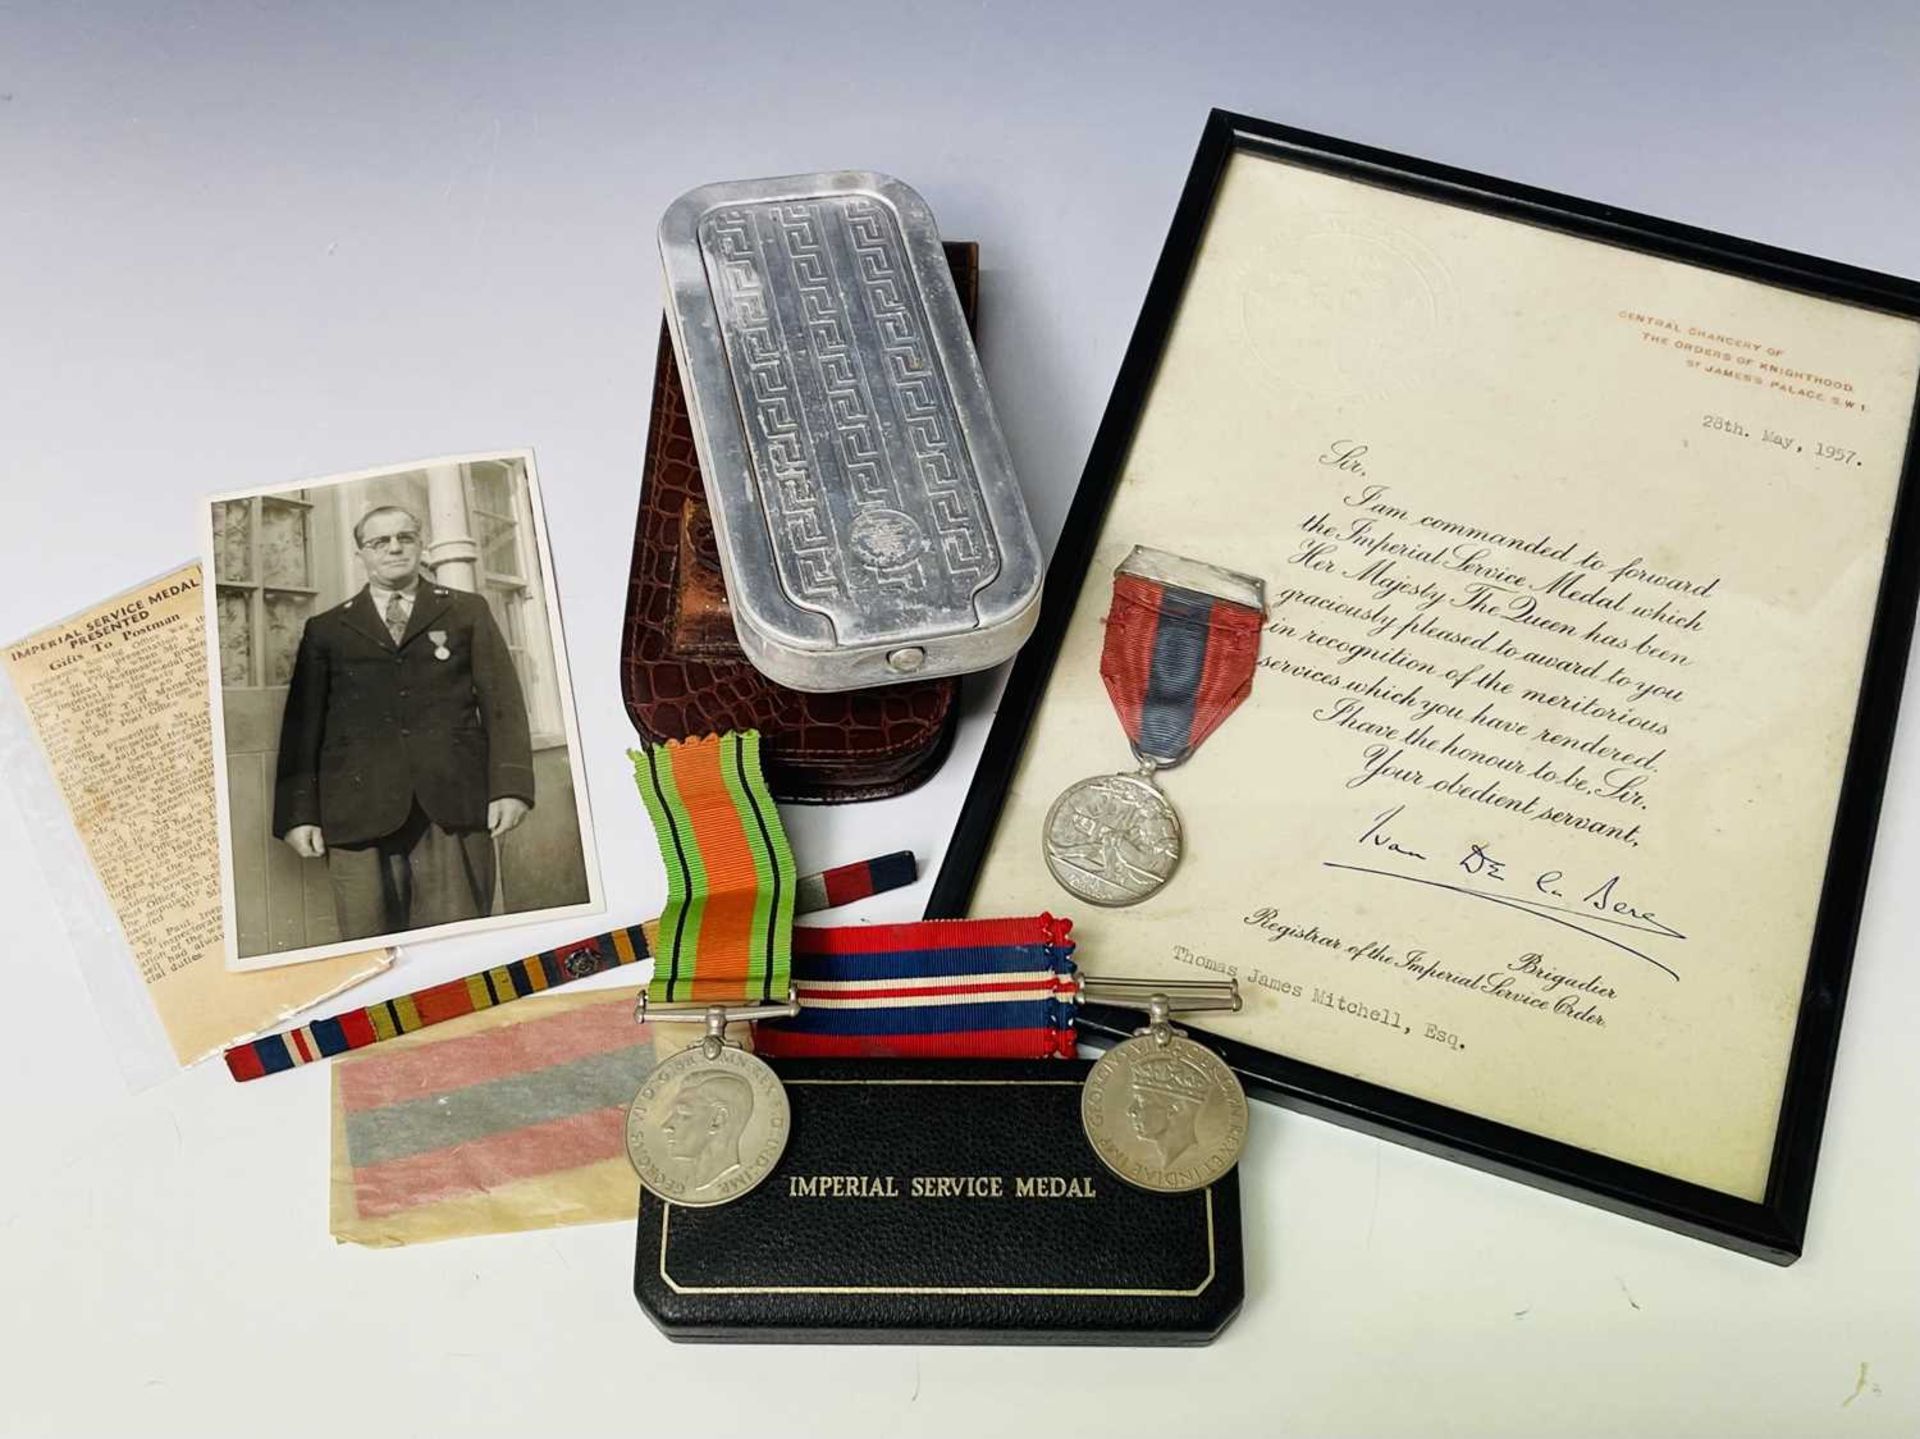 Penzance, Cornwall Interest. Lot comprises a framed and glazed silver Imperial Service Medal with